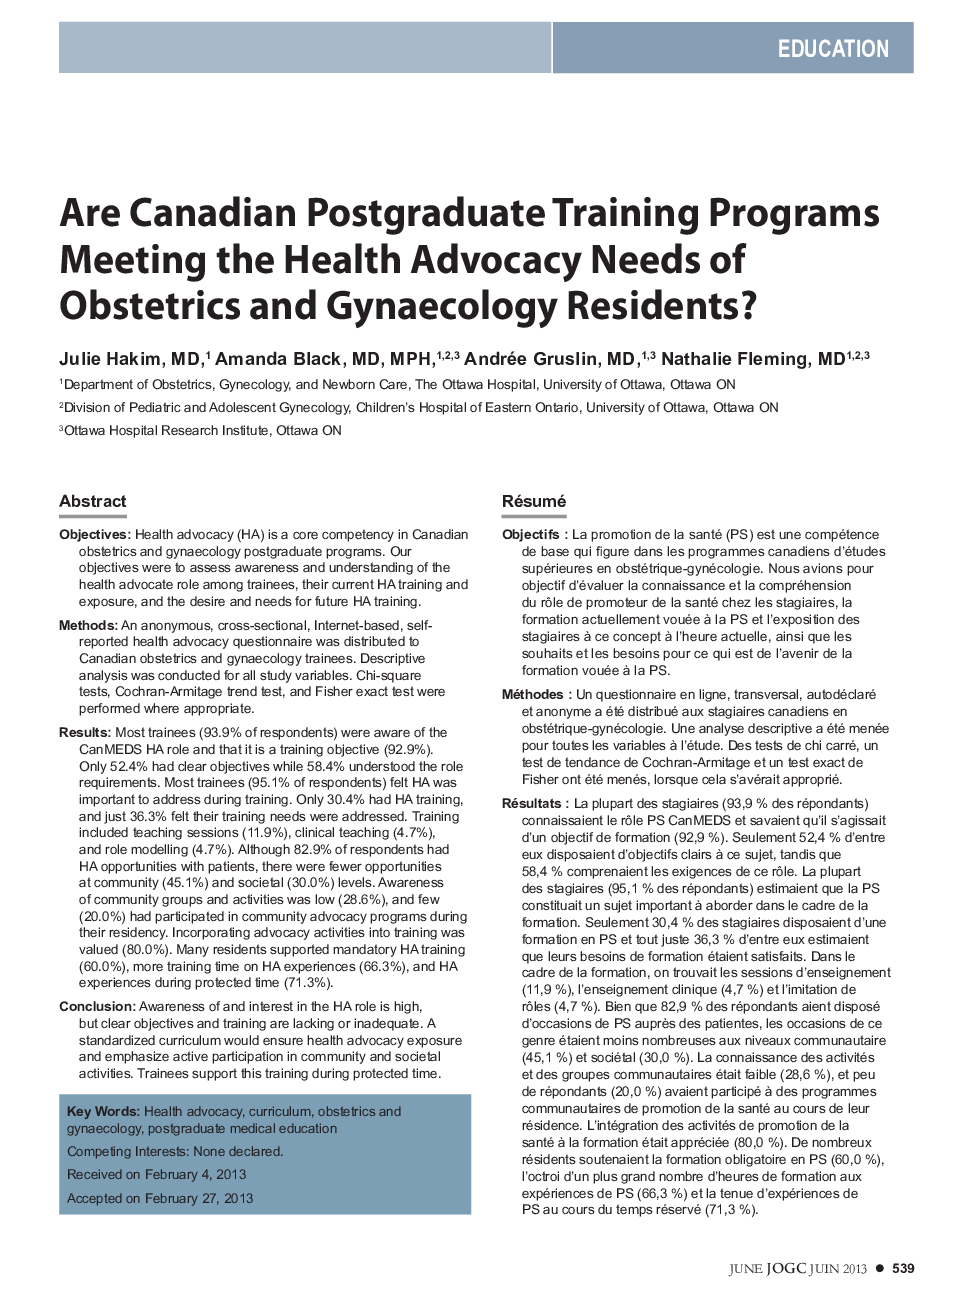 Are Canadian Postgraduate Training Programs Meeting the Health Advocacy Needs of Obstetrics and Gynaecology Residents?